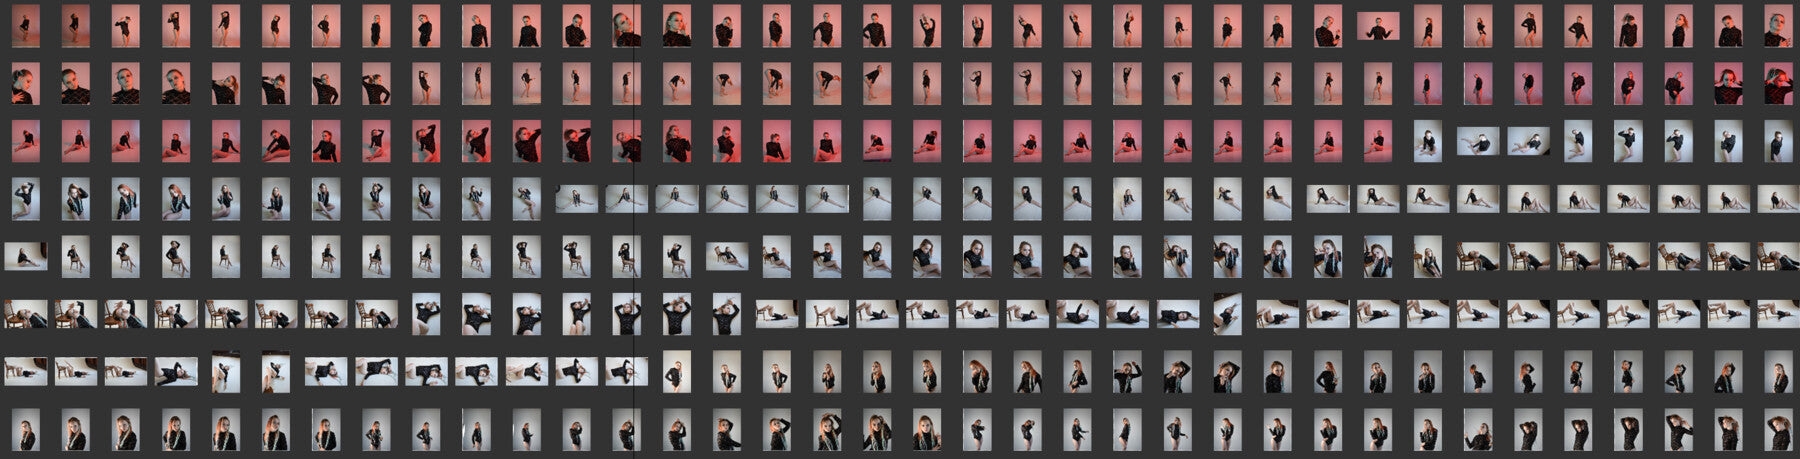 Fashion Model Poses - 300+ Reference Photo Pack